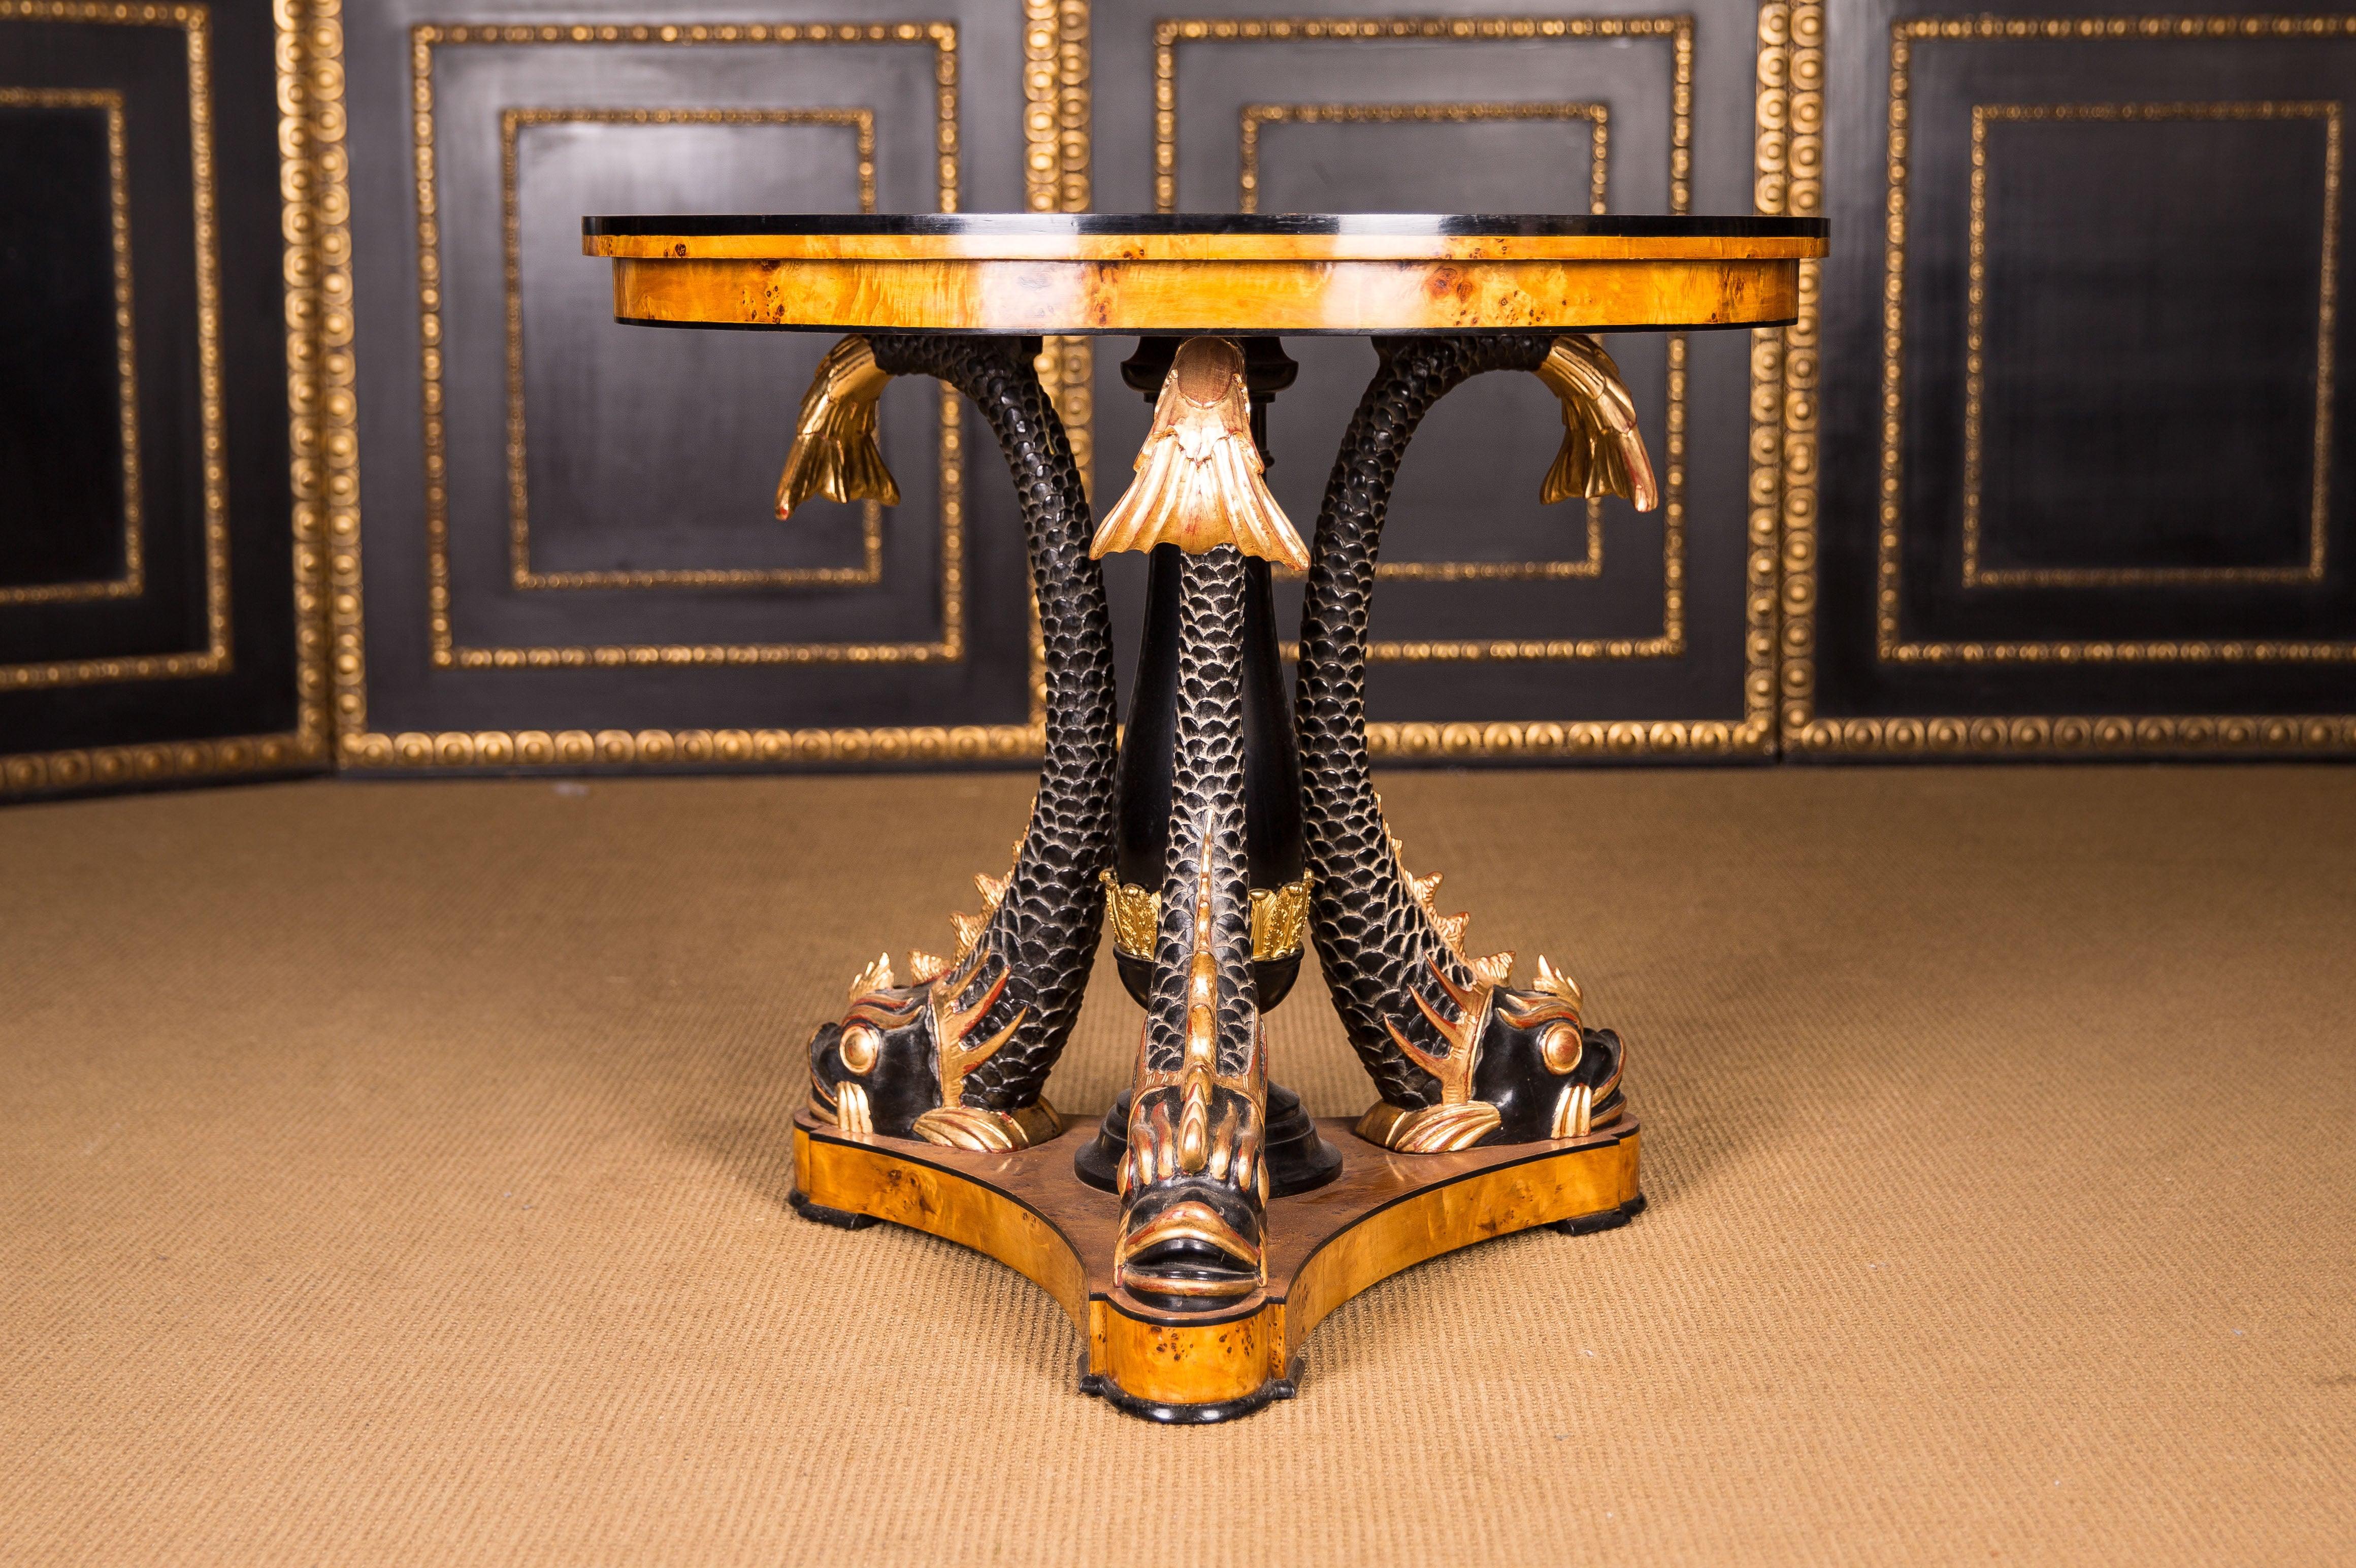 Hand-Carved Majestic Table with Dolphins in the Empire Style